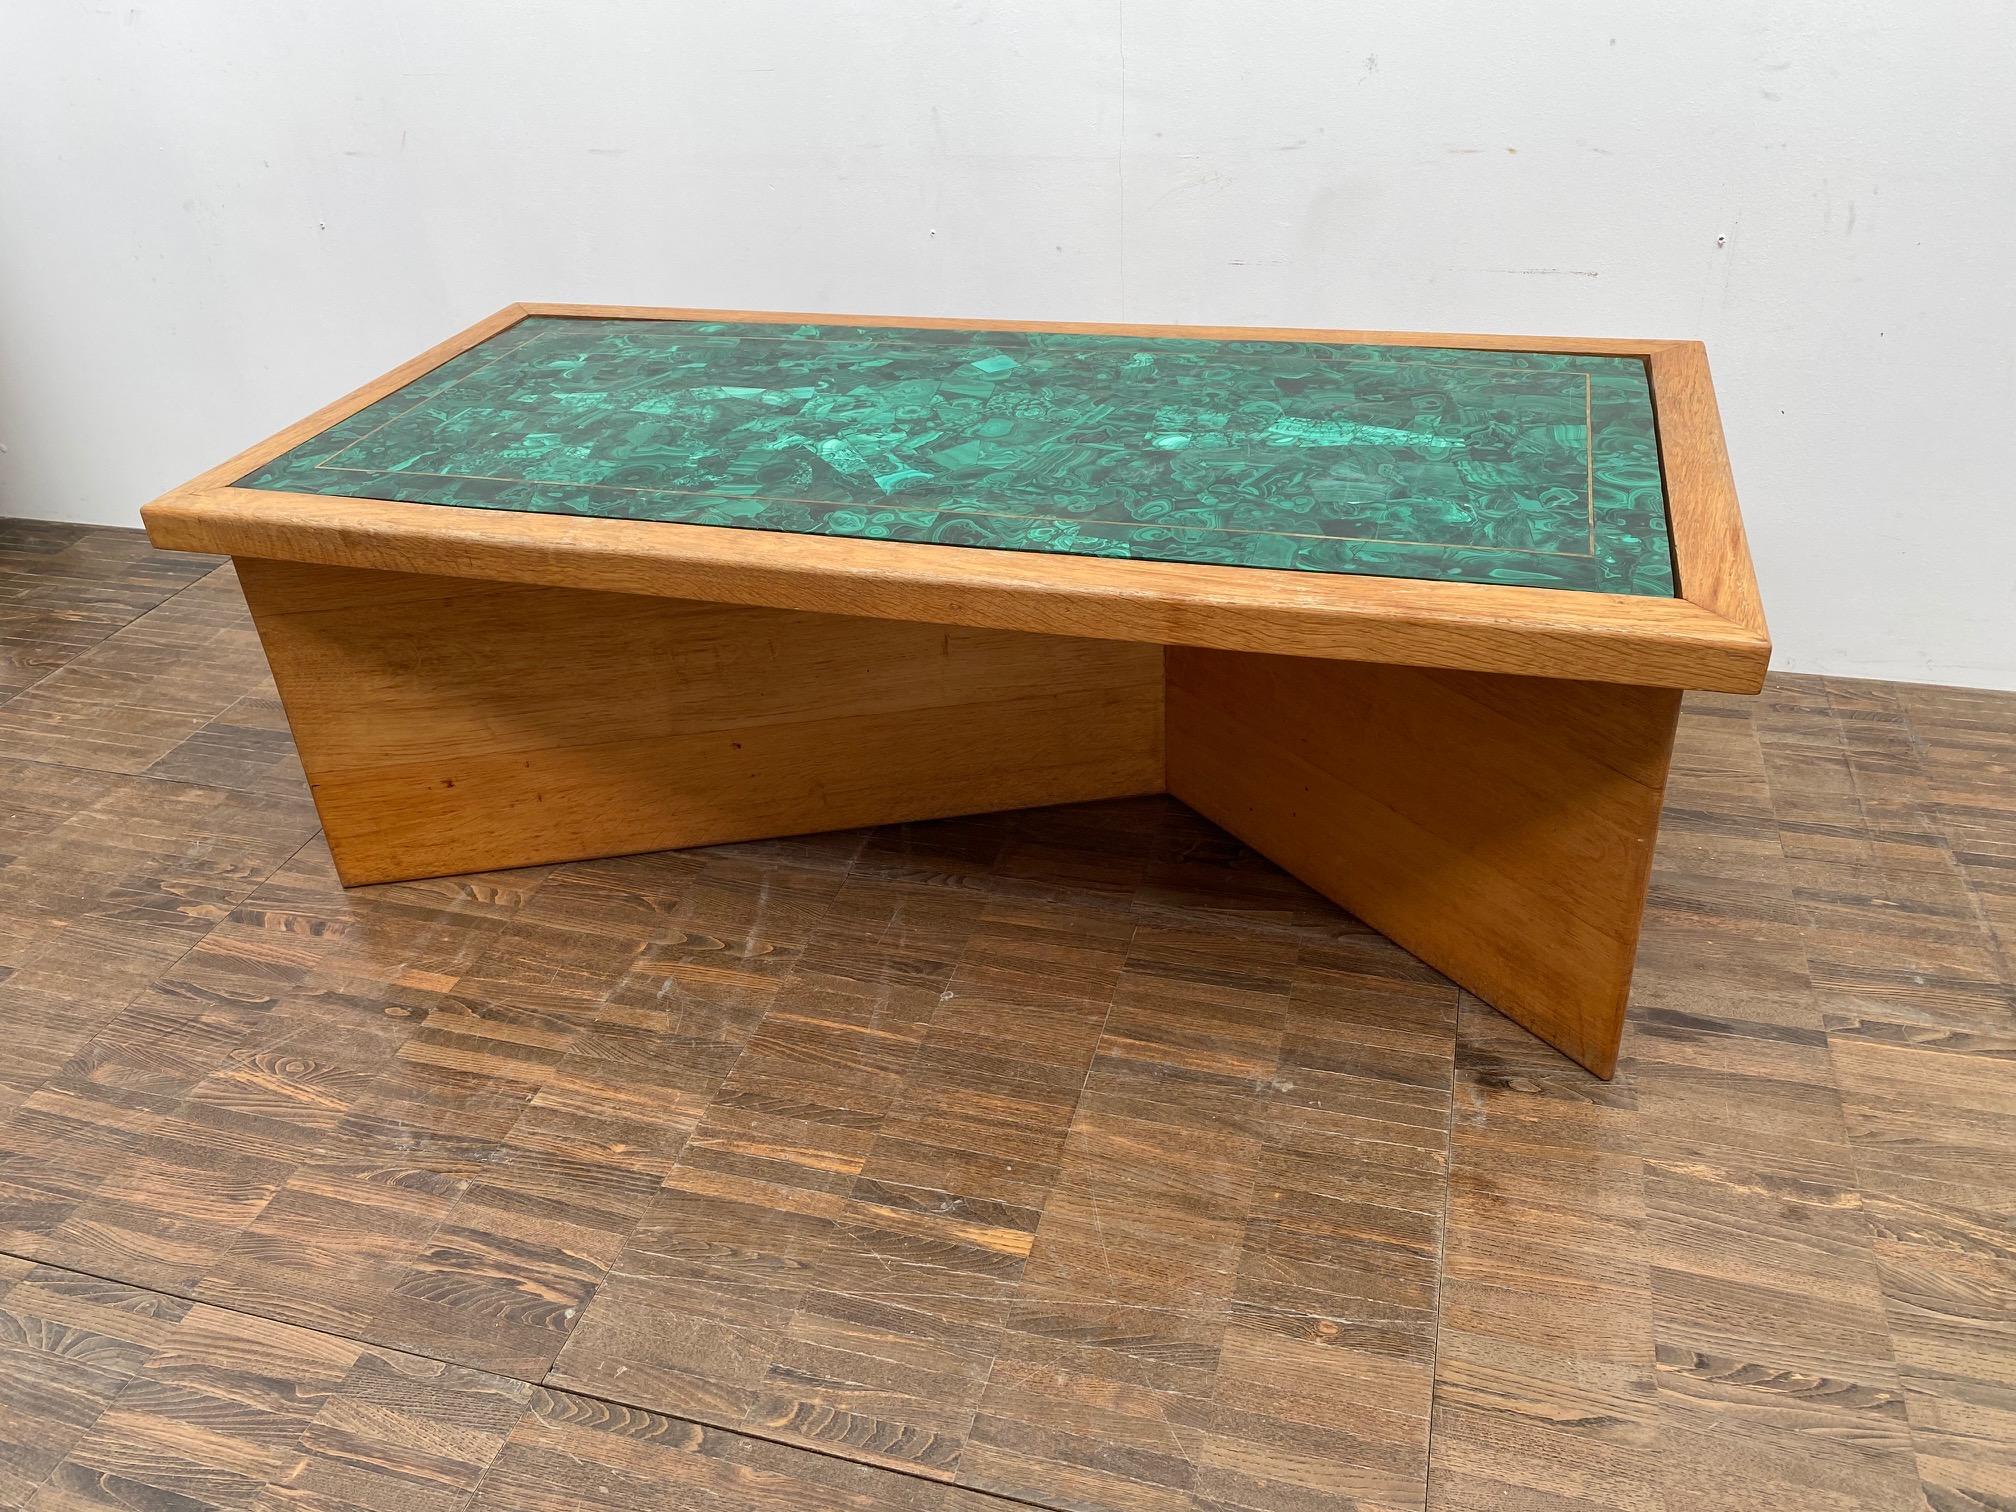 20th Century Mid-Century Modern Green Coffee Table, Malachite and Wood For Sale